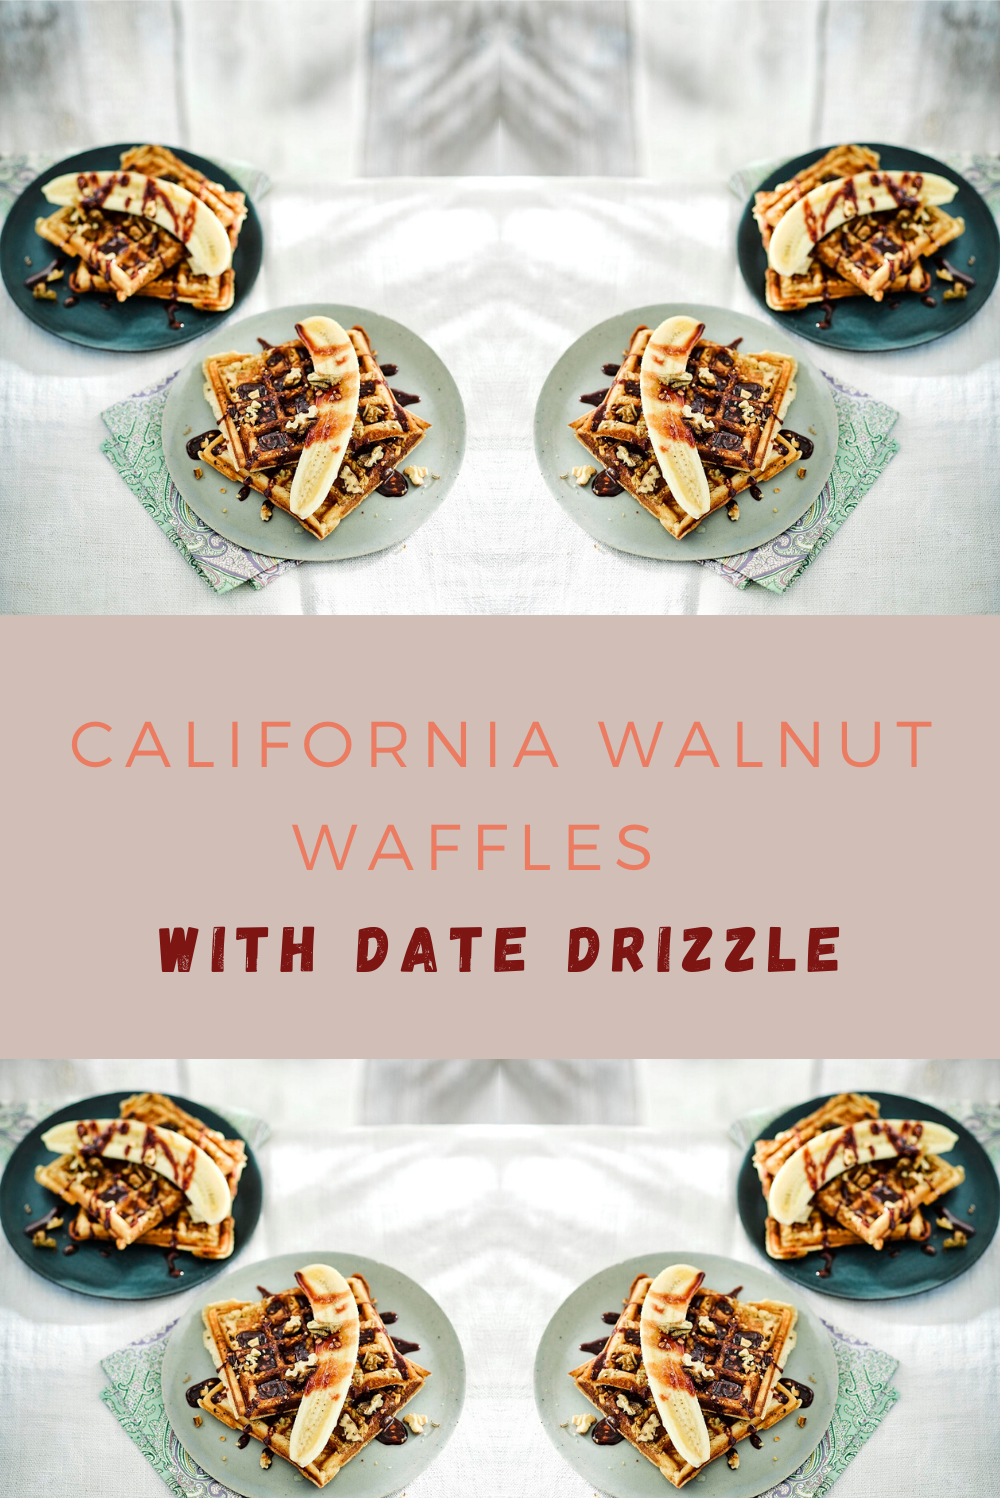 California Walnut Waffles With Date Drizzle﻿